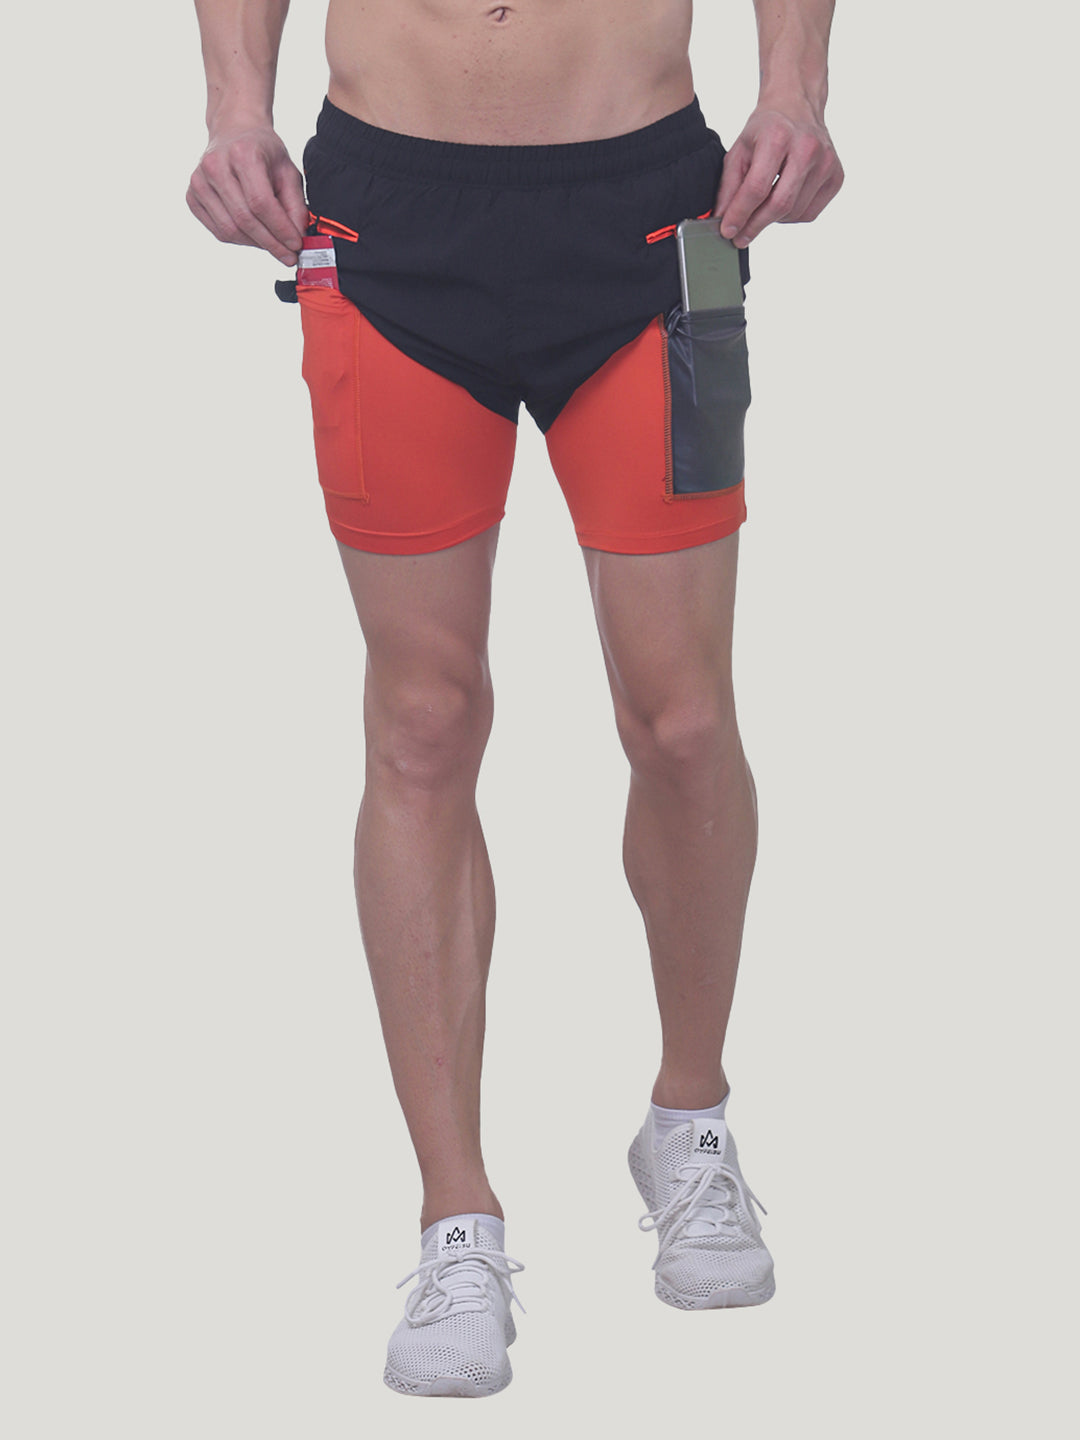 2-in-1 Running Shorts with Water Resistant Phone Pocket 5"